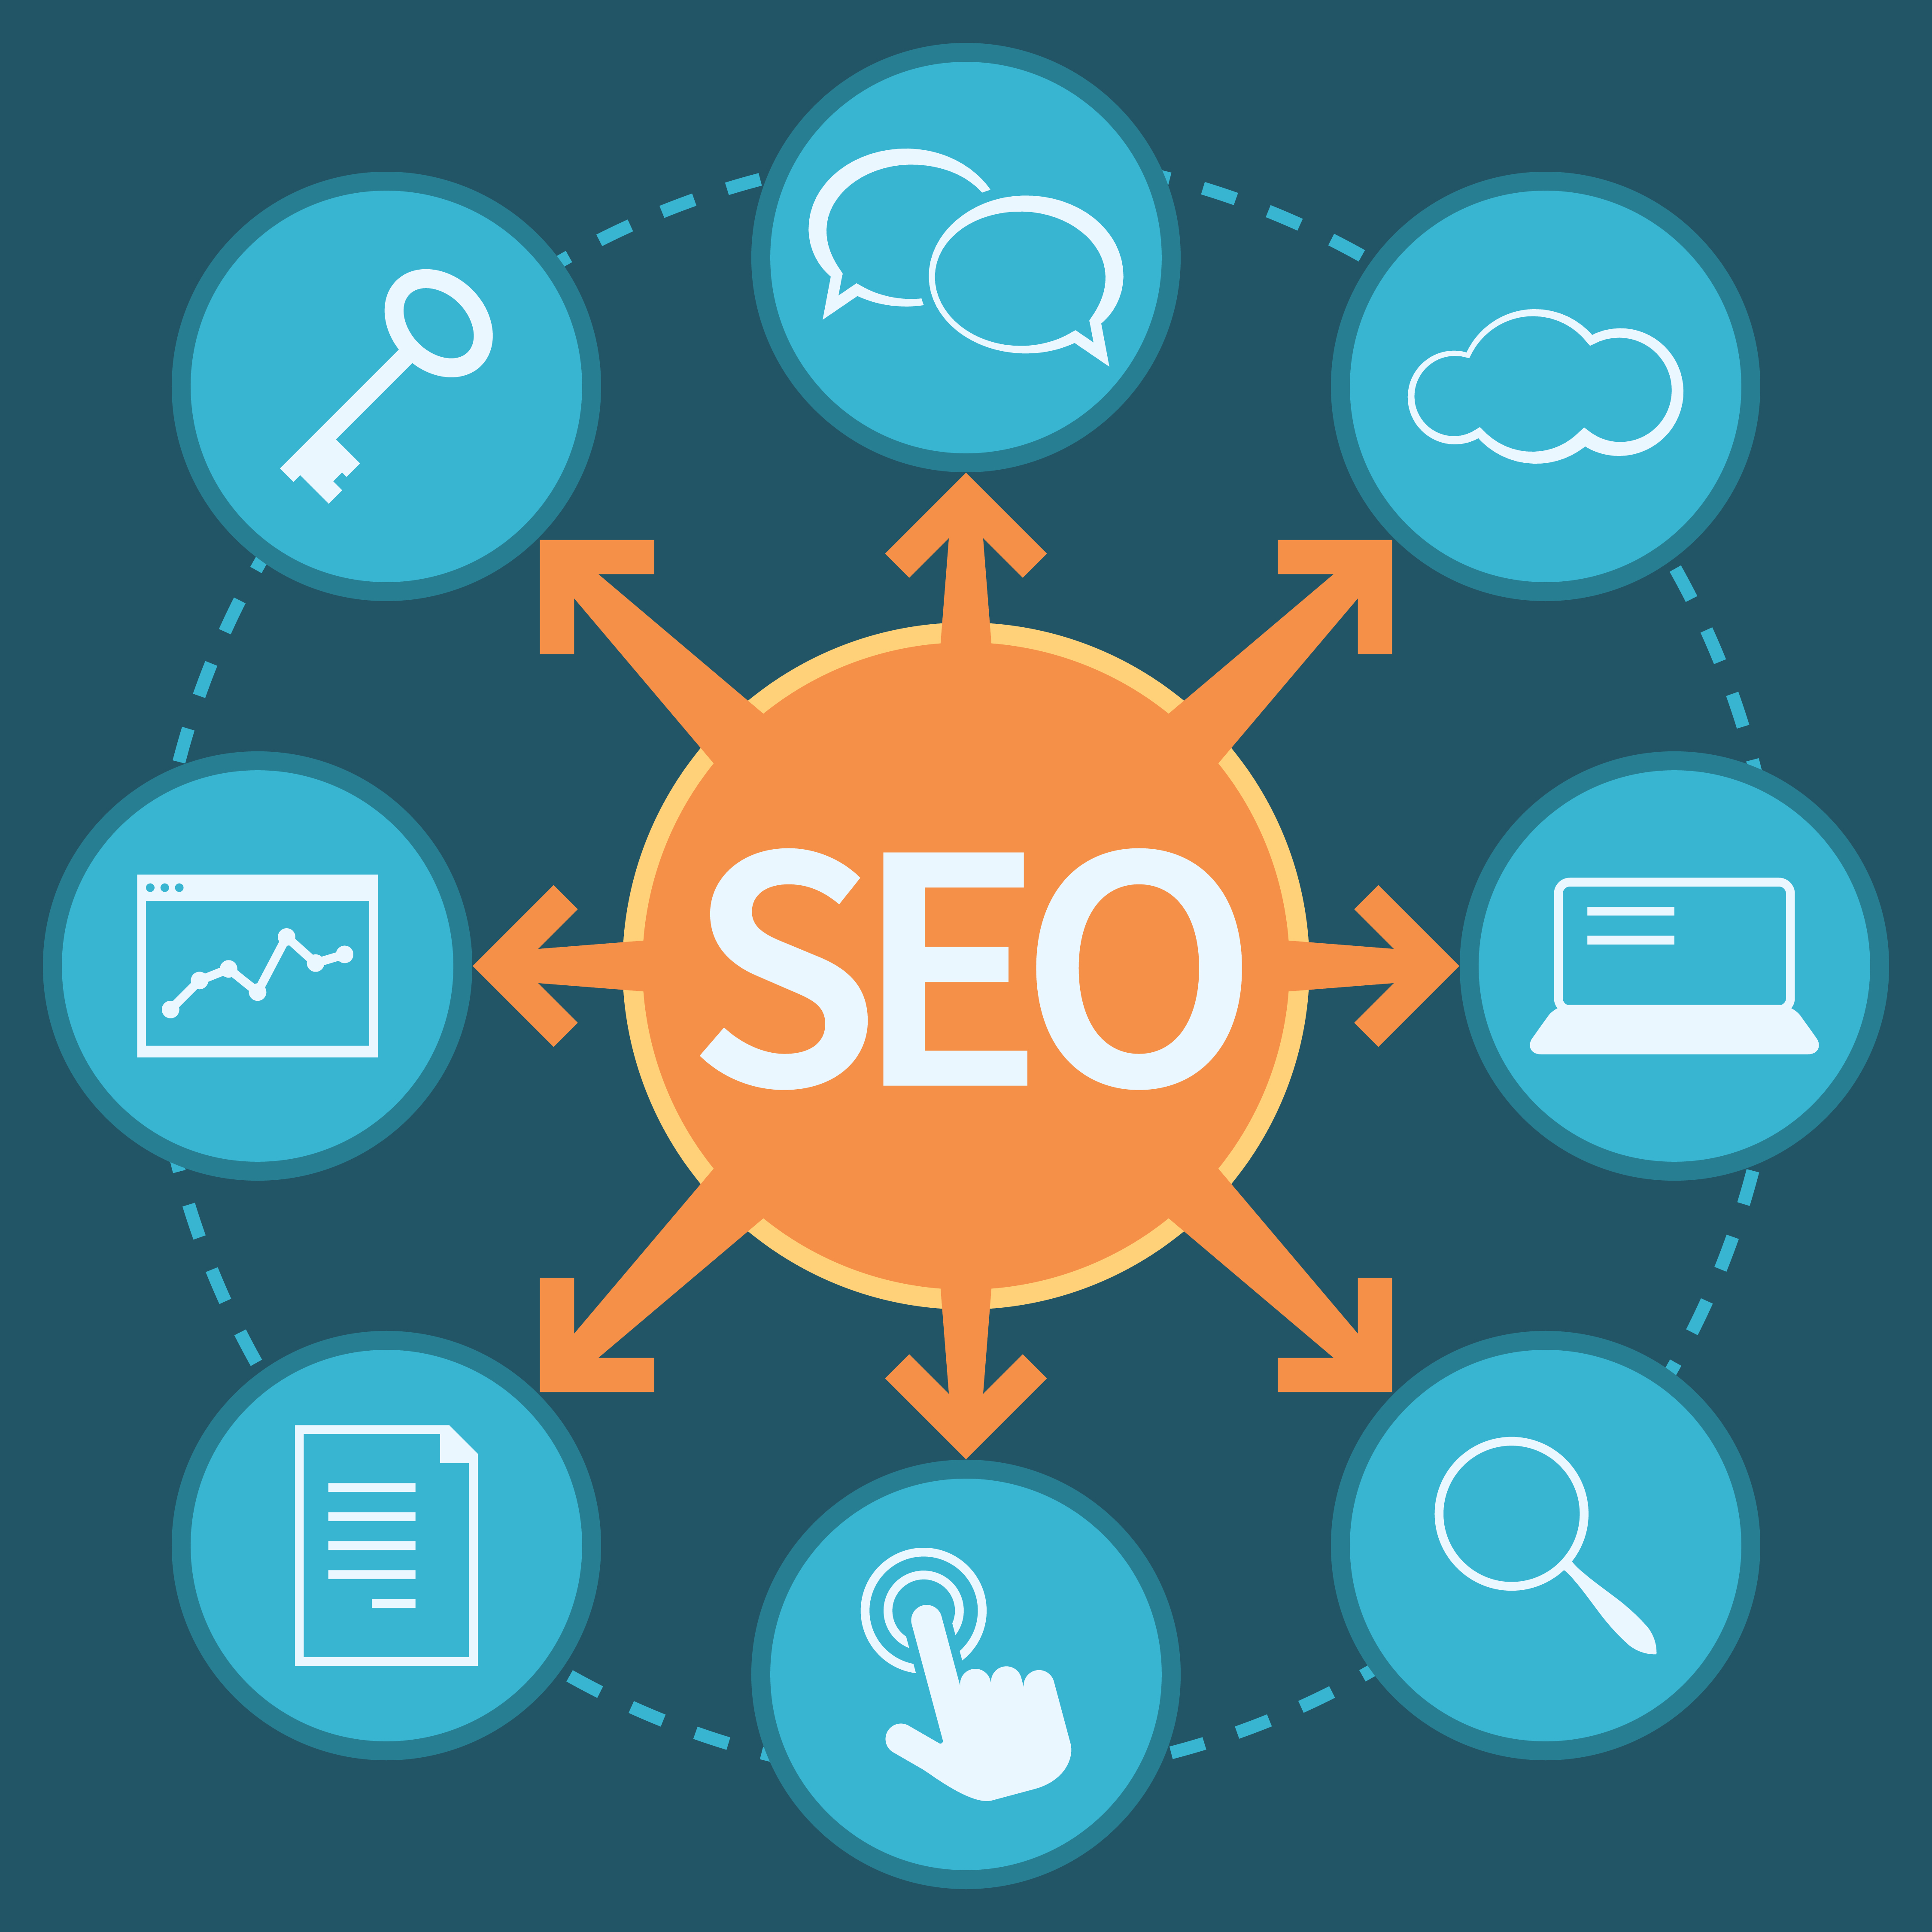 Professional Seo Will Help Generate More Business